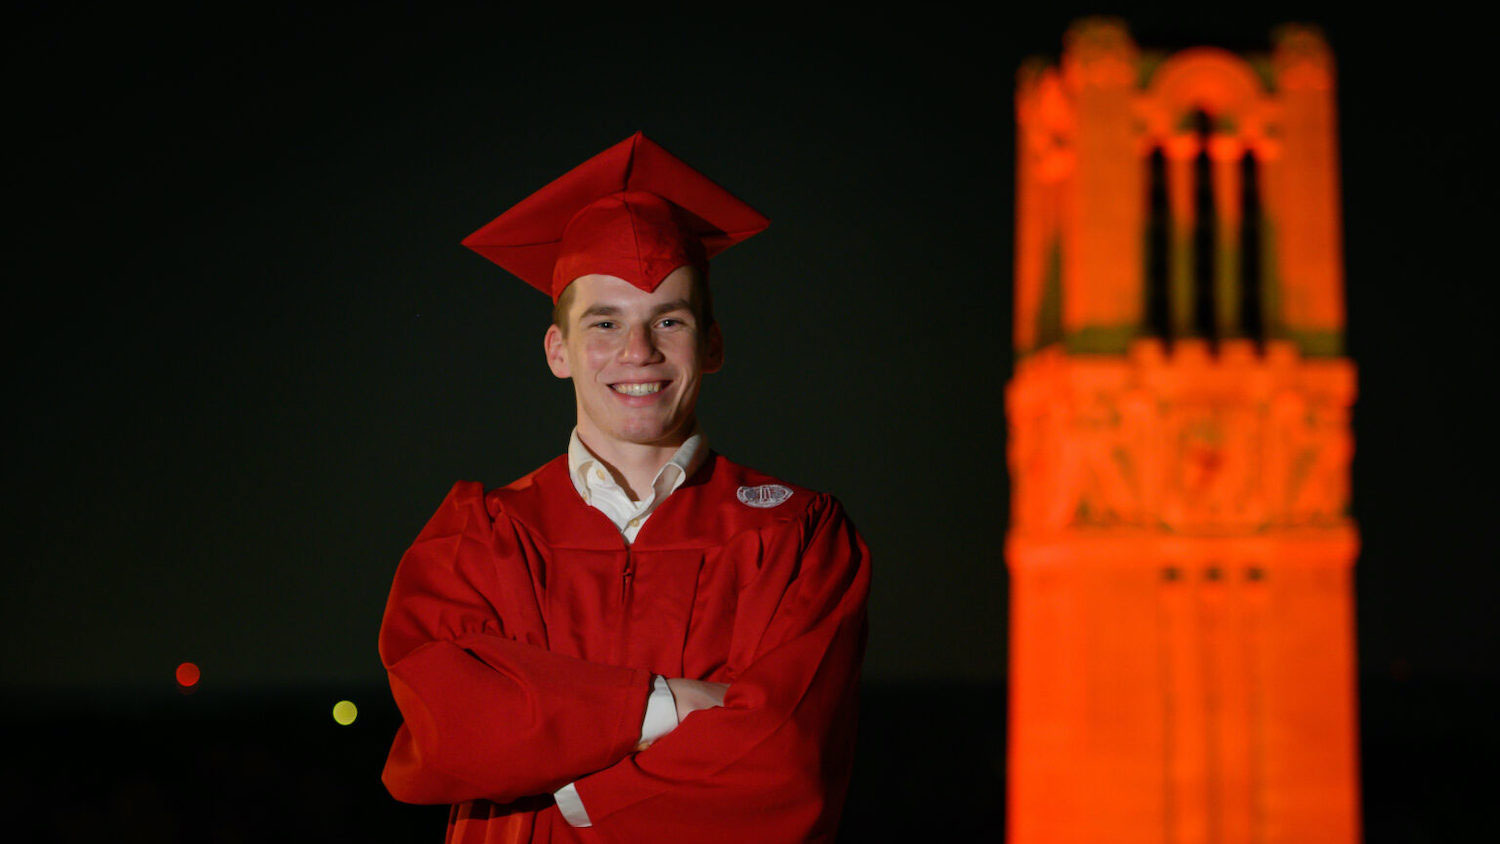 Jush Guter in his graduation gown in front of the belltower, which is lit red